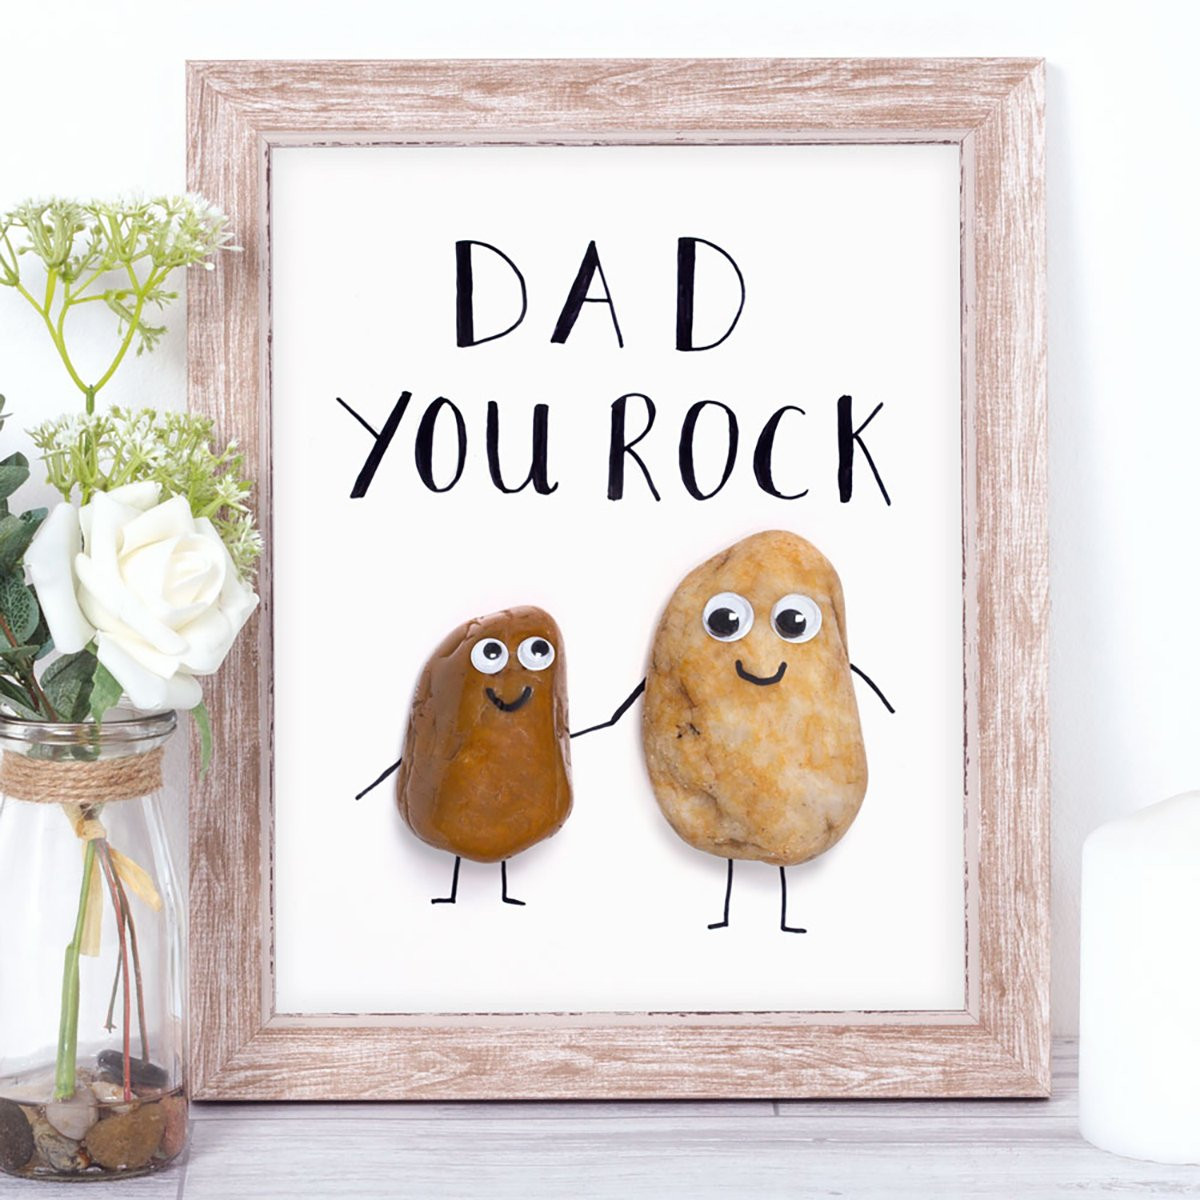 Father'S Day Craft Ideas For Kids
 8 Father’s Day Crafts Kids Can Help Make